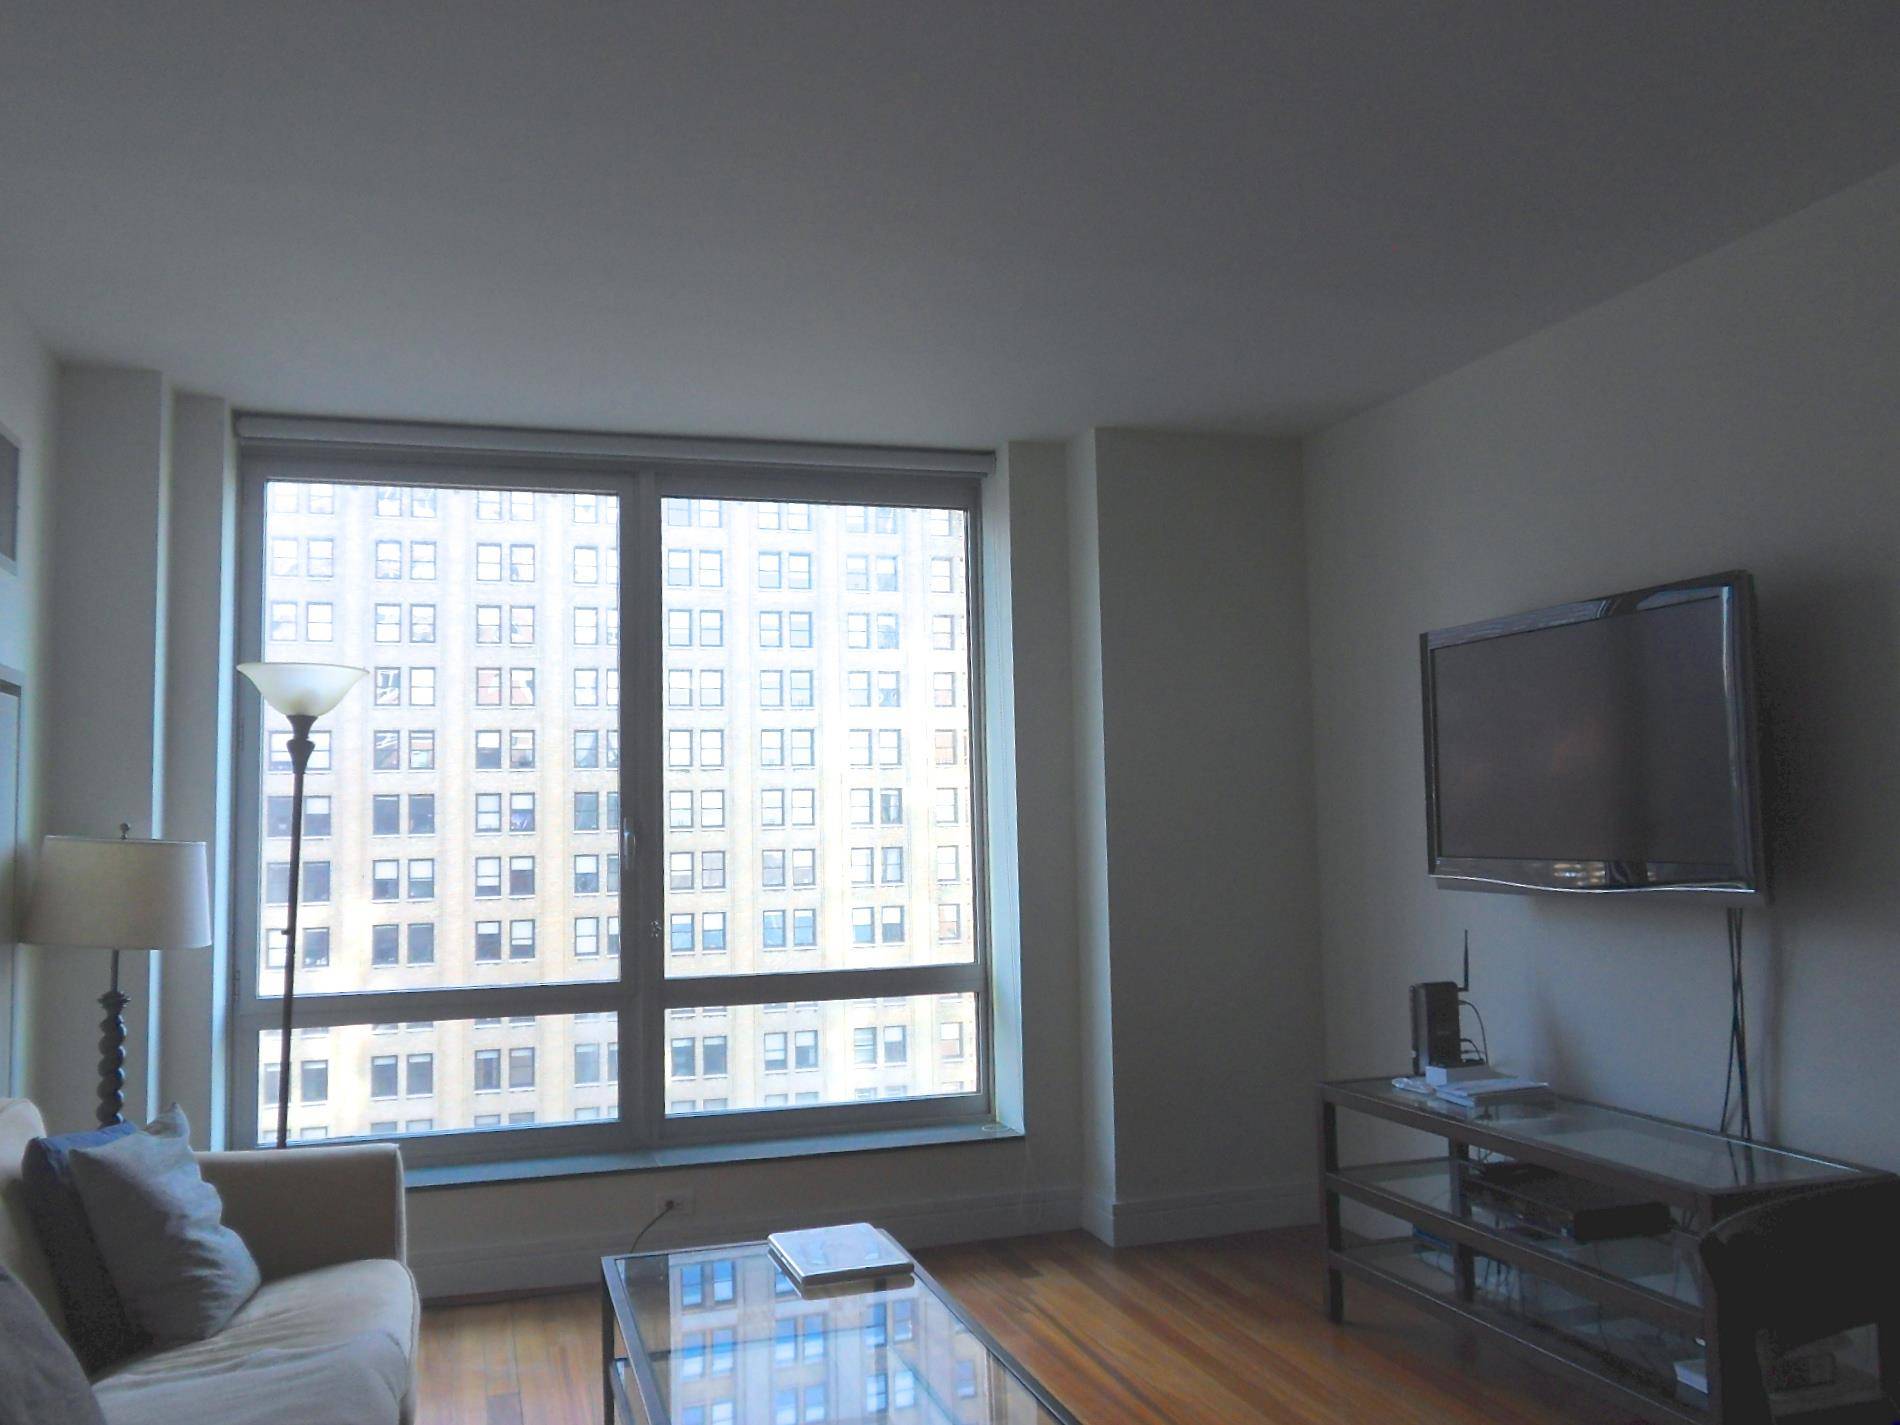 The 1 bed 1. 5 bath measures a generous 875 square feet that can be rented furnished or unfurnished.